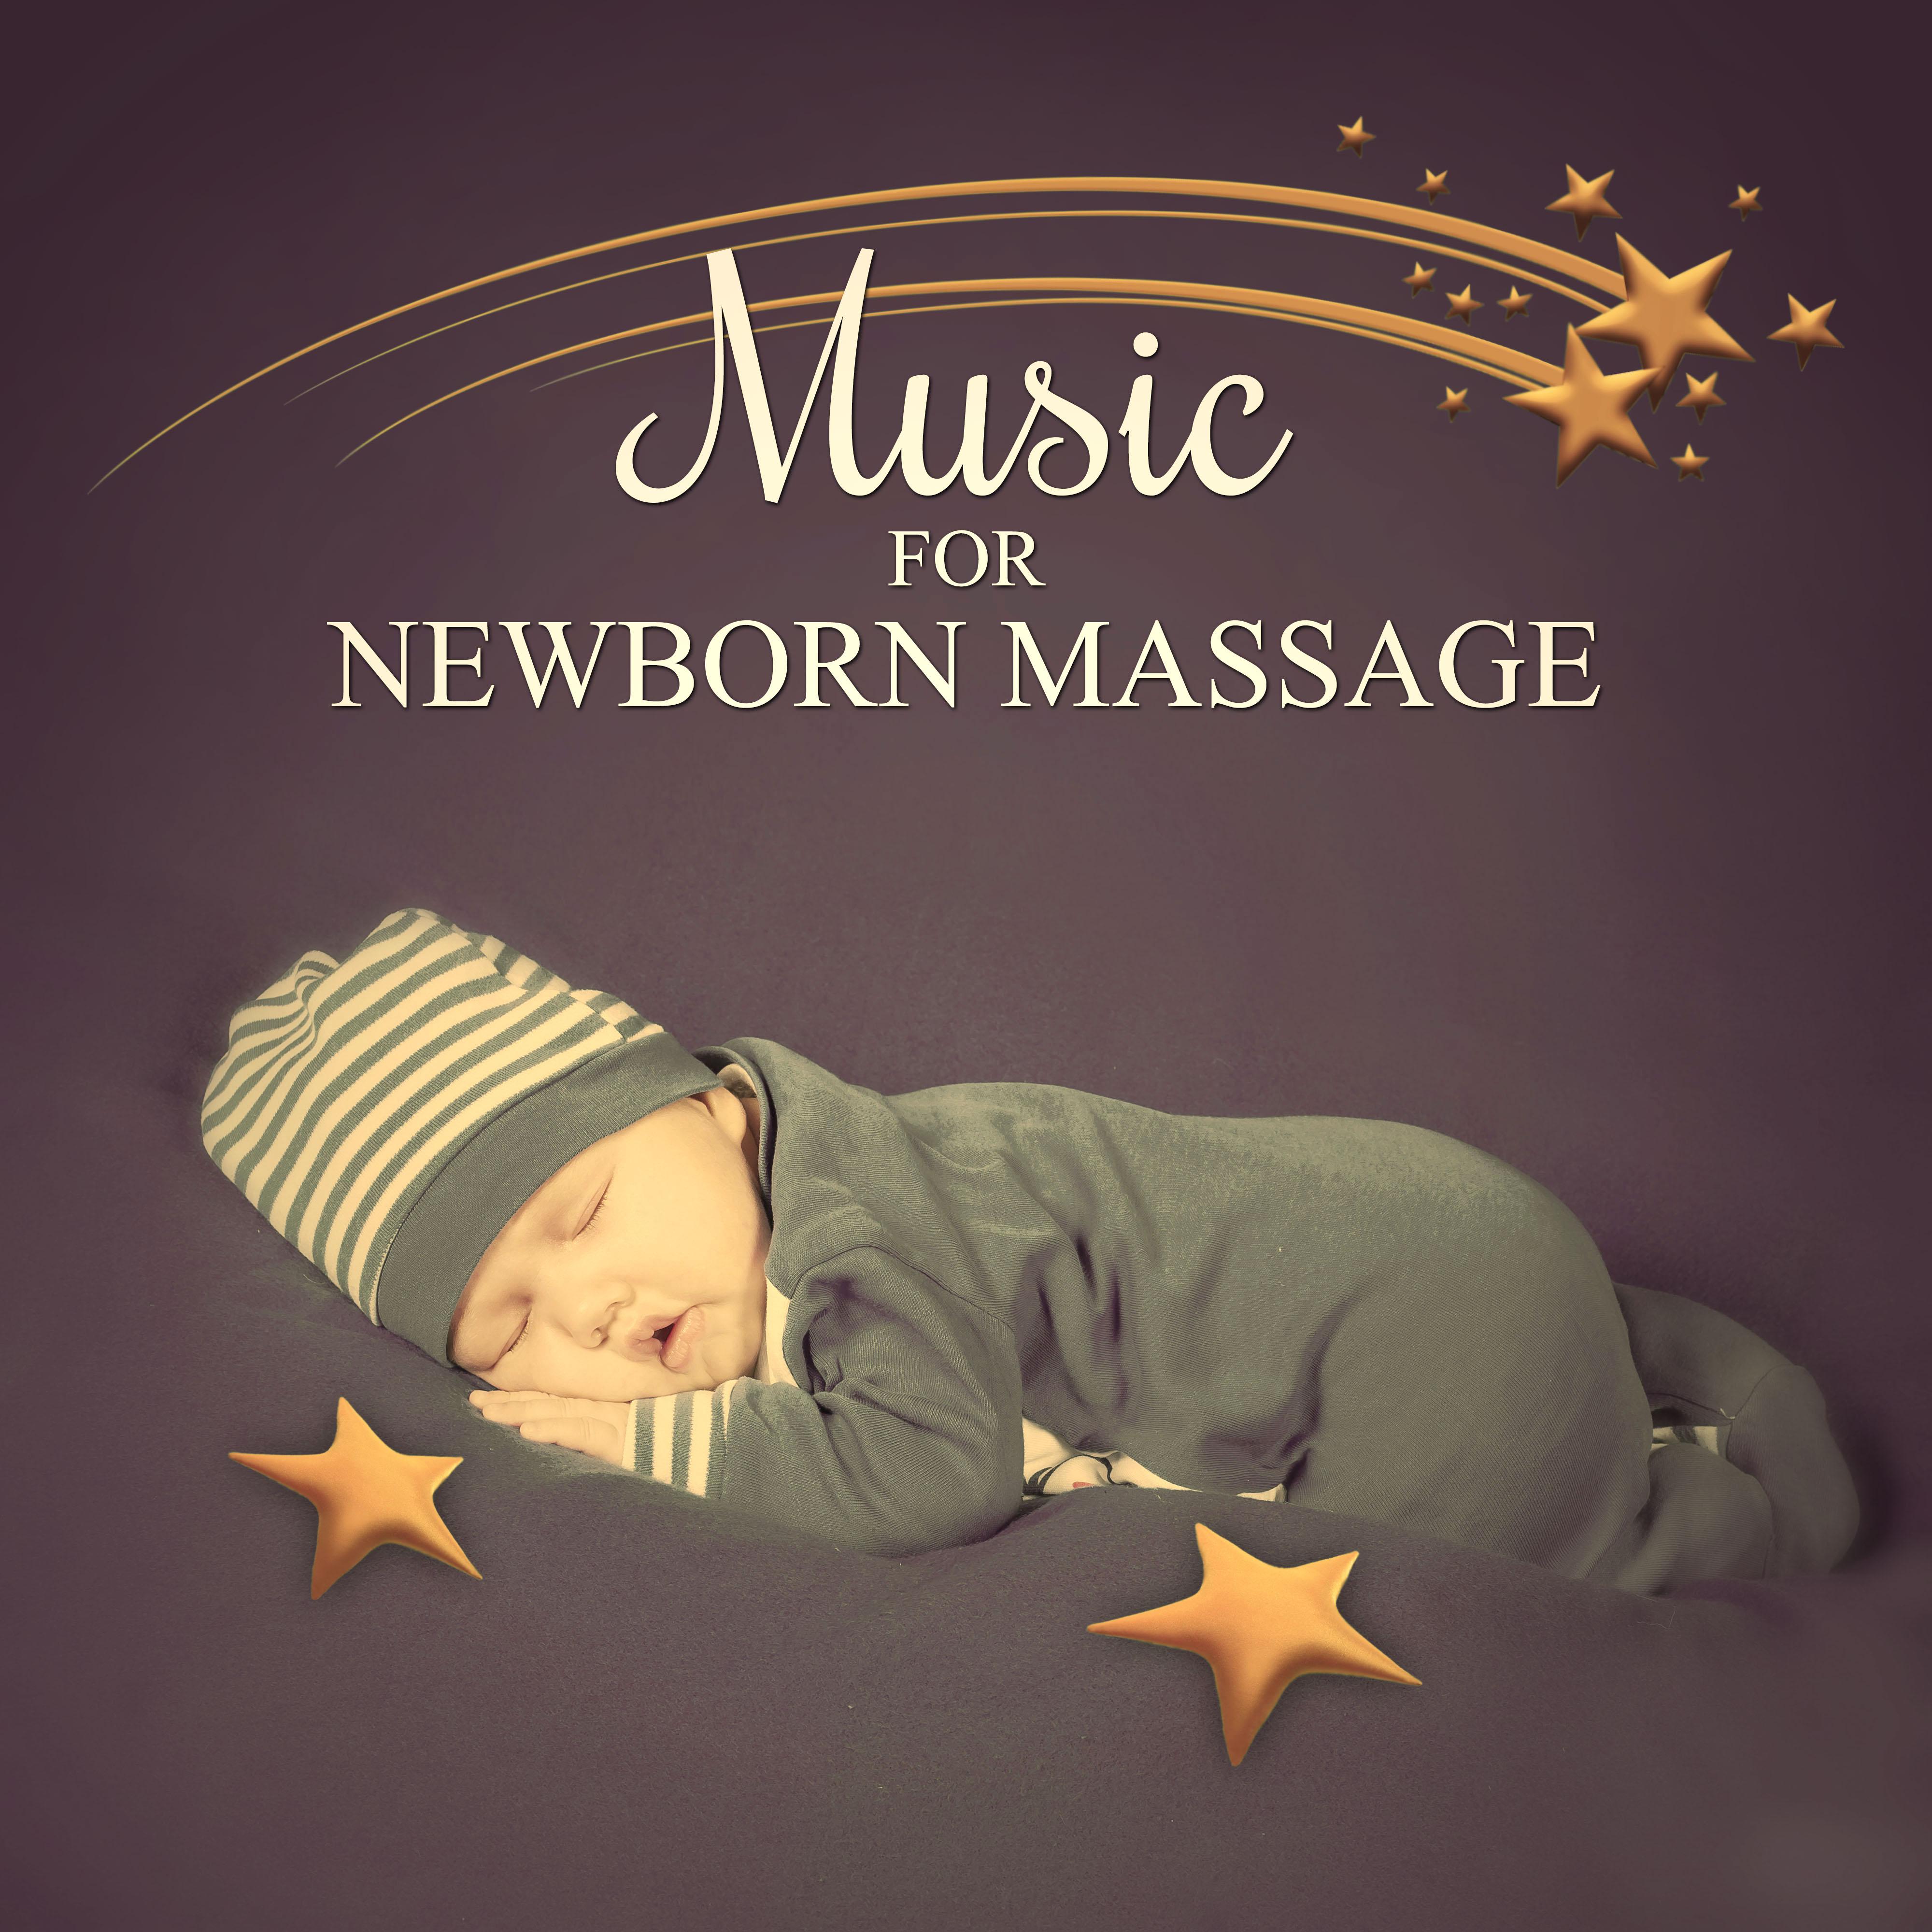 Music for Newborn Massage  Sleeping Sounds of Nature for Relaxing Baby Massage, Baby Therapy, Help Your Baby Sleep Through the Night